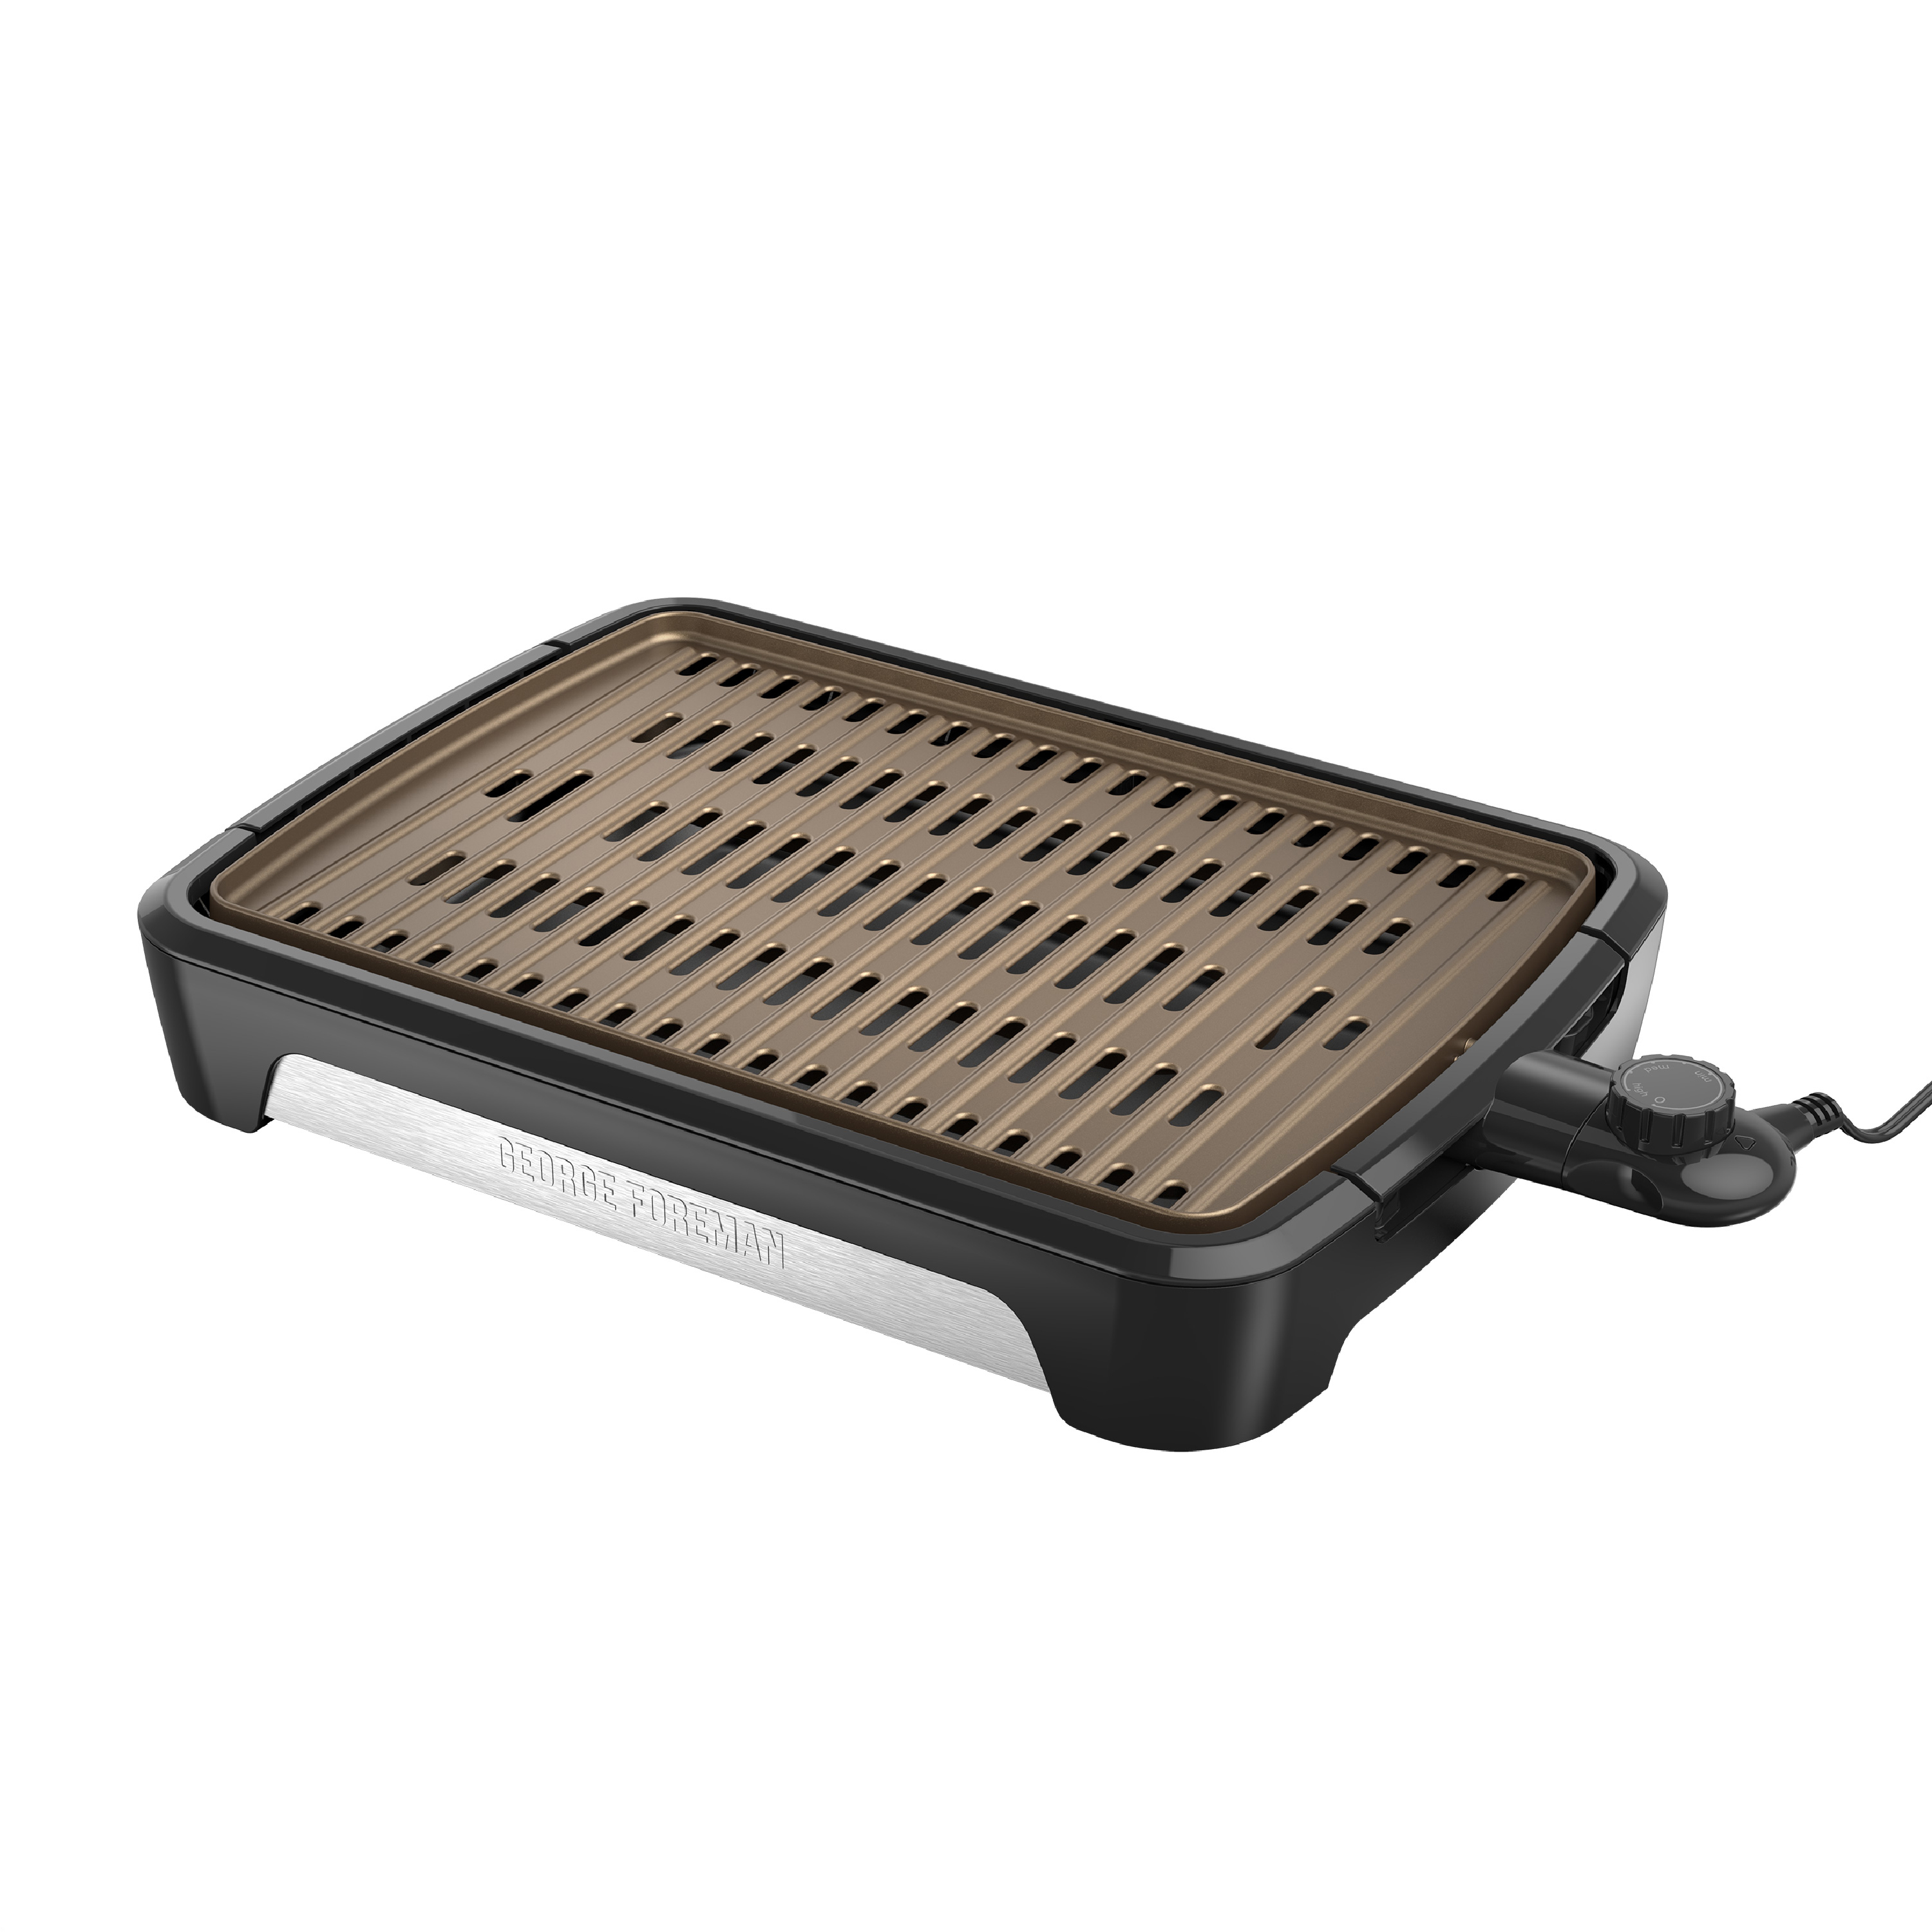 George Foreman Party Size Open Grate Smokeless Grill, Black, GFS0172SB - image 1 of 13